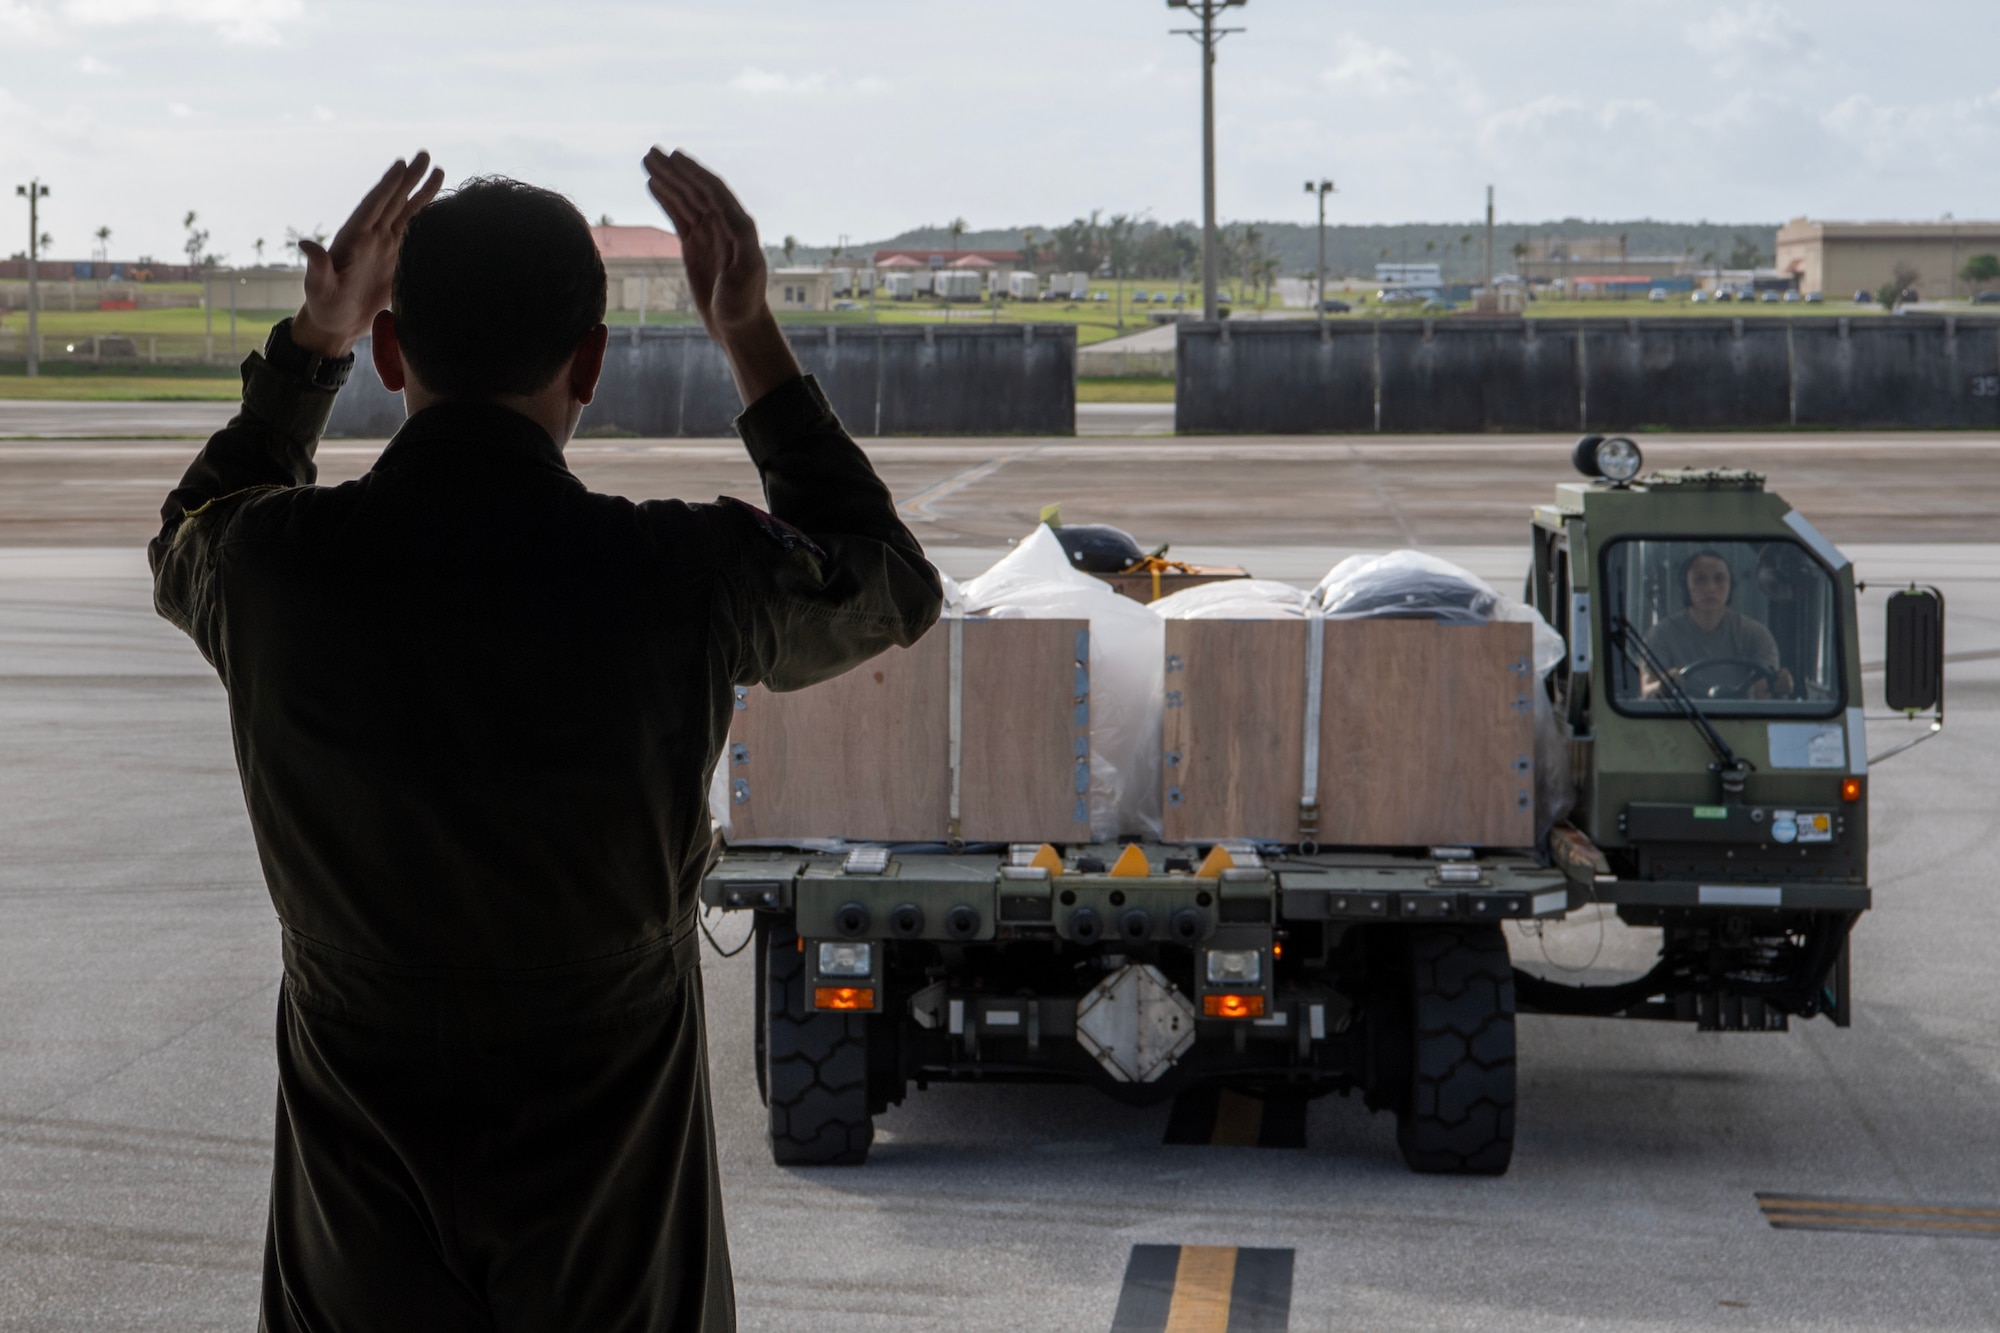 Photo of U.S. Air Force loadmaster guiding a cargo loader to the back of an aircraft